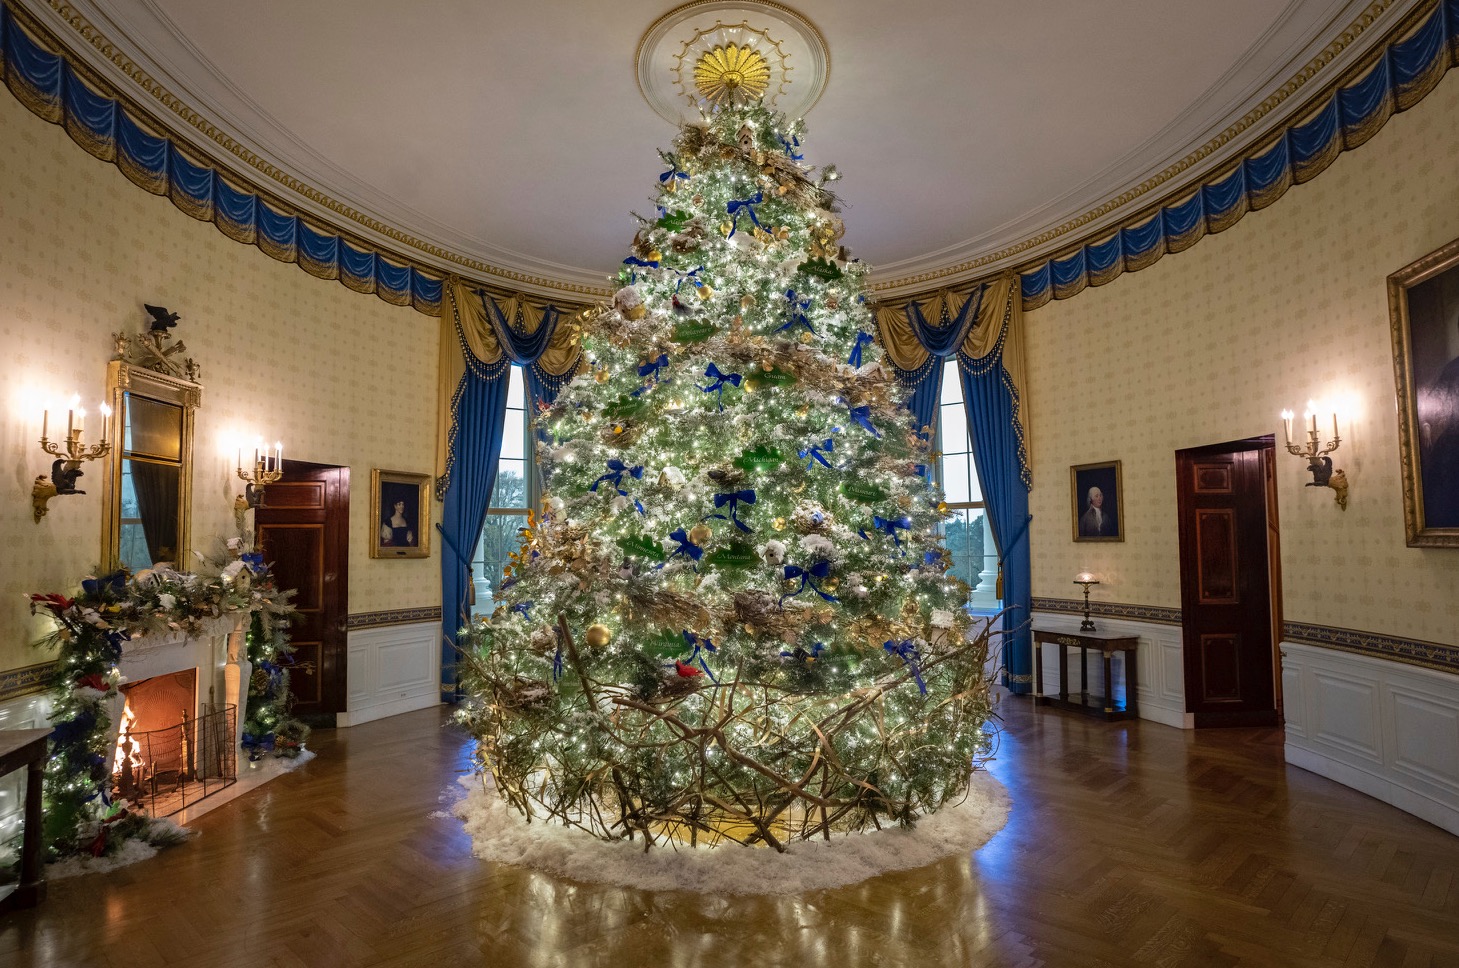 2022 Holidays at the White House | The White House